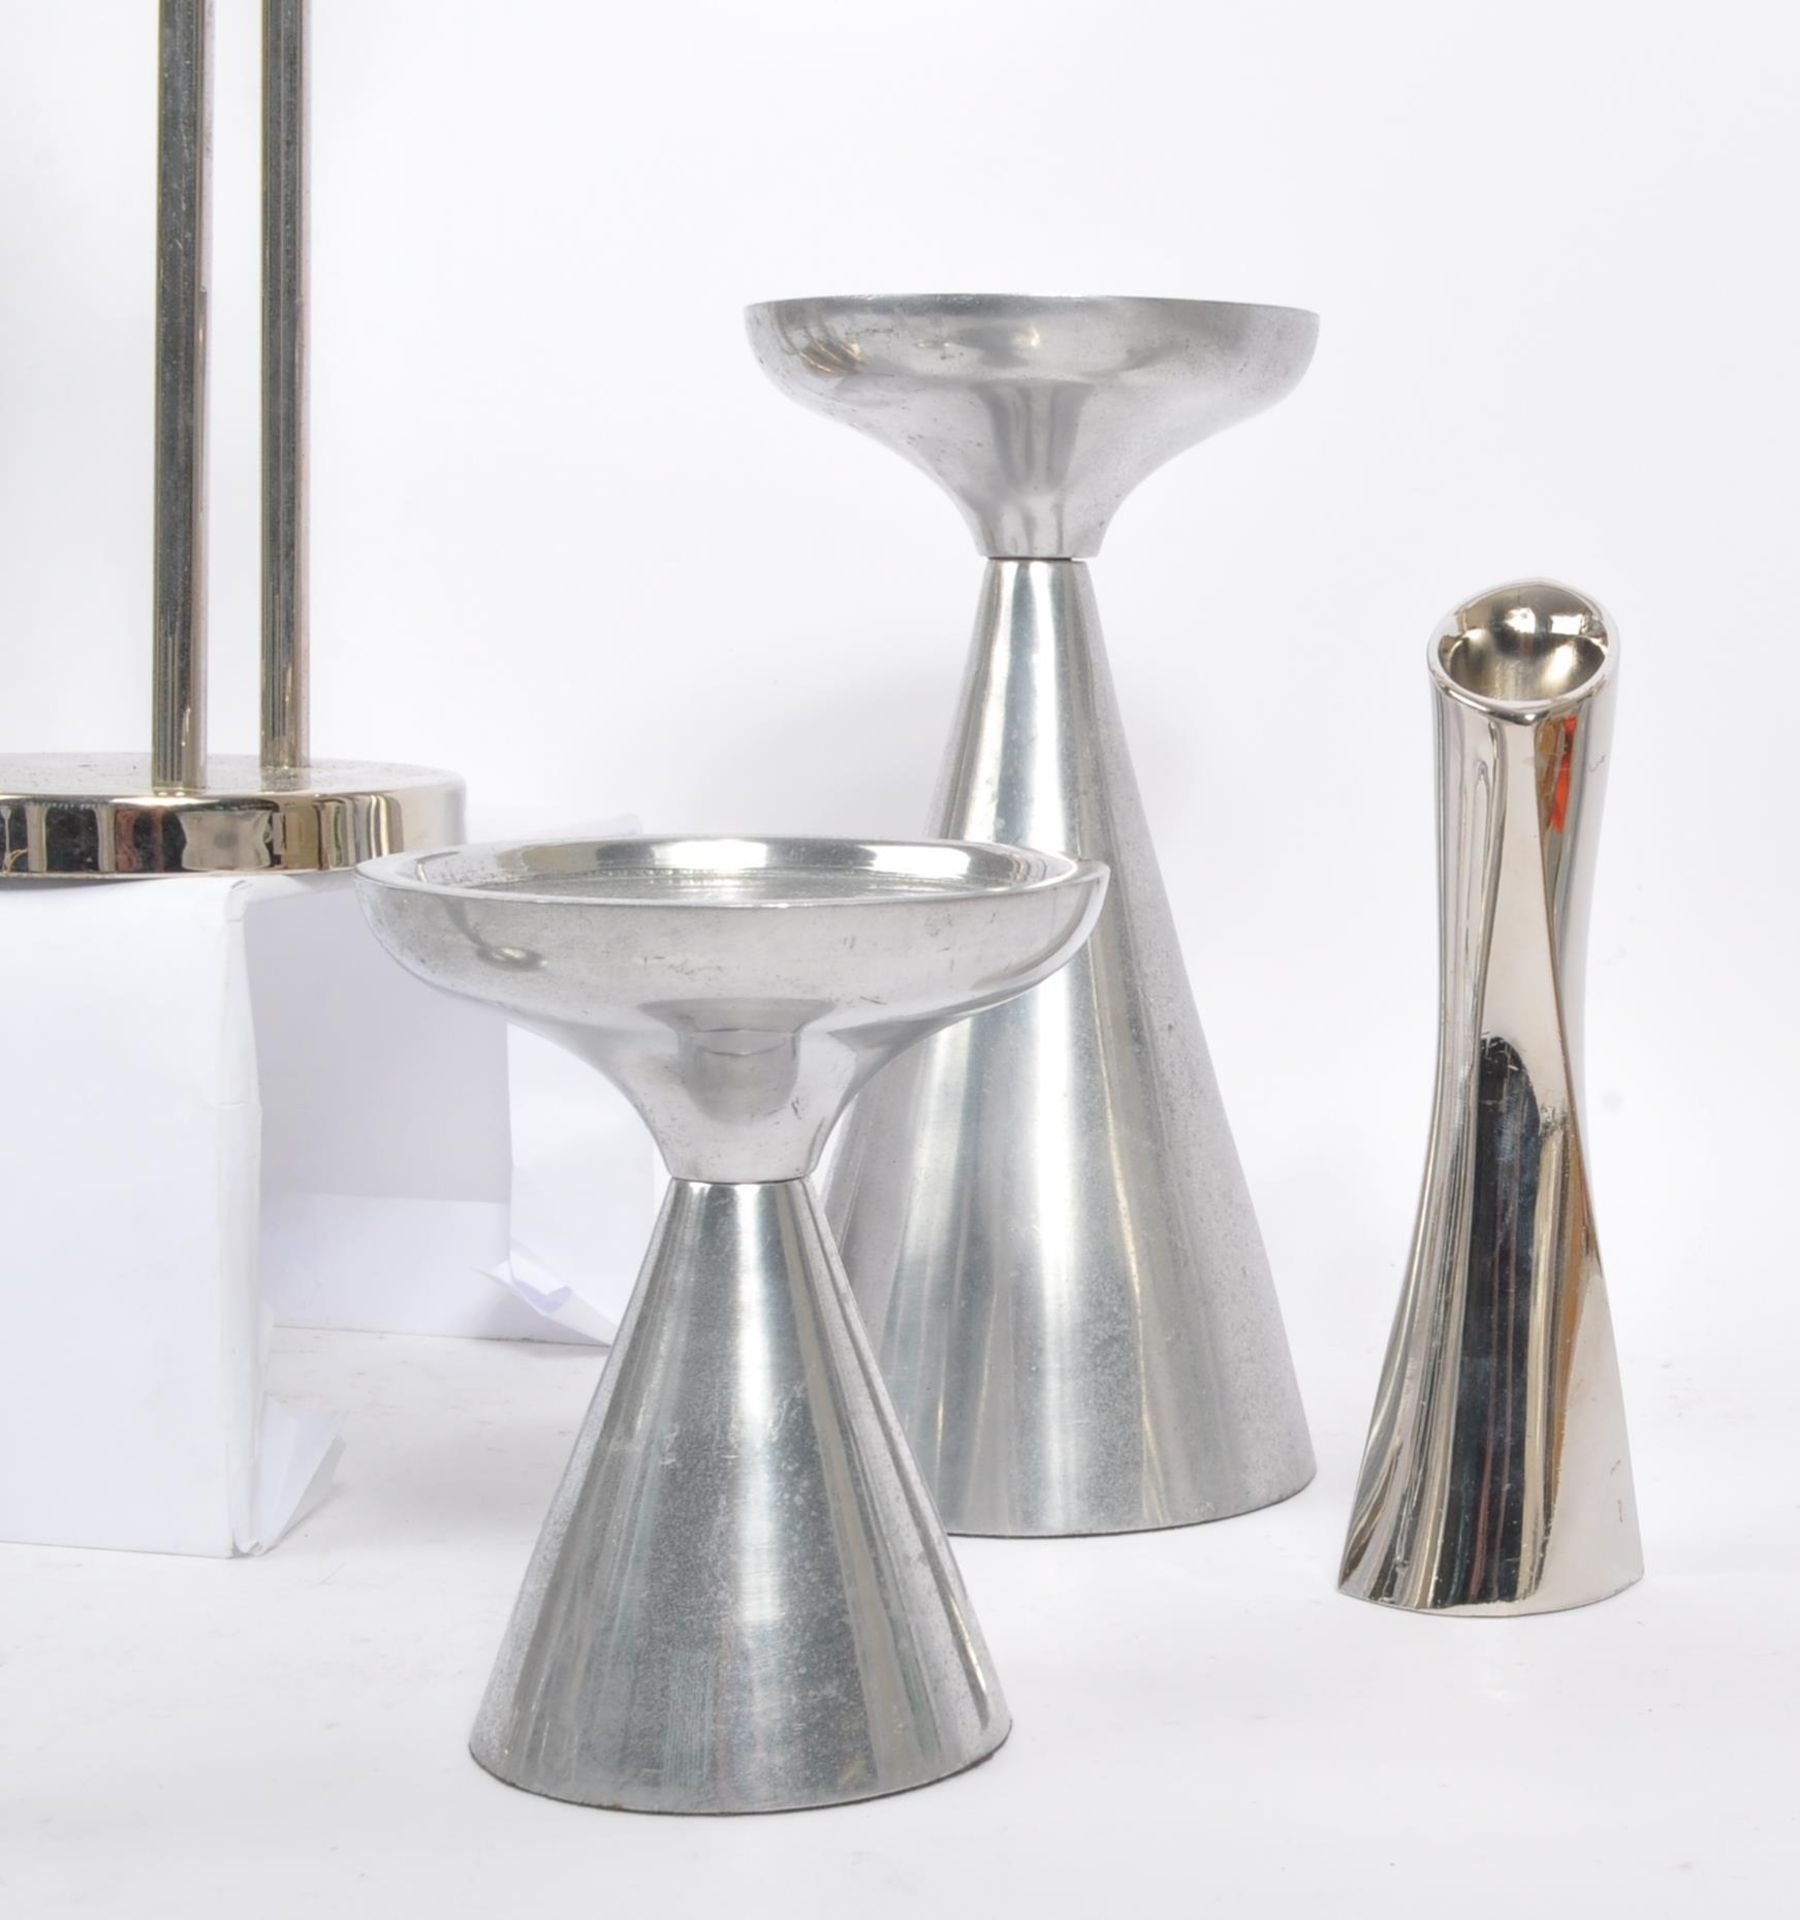 COLLECTION OF EIGHT 1980S STAINLESS STEEL CANDLE HOLDERS - Image 3 of 10